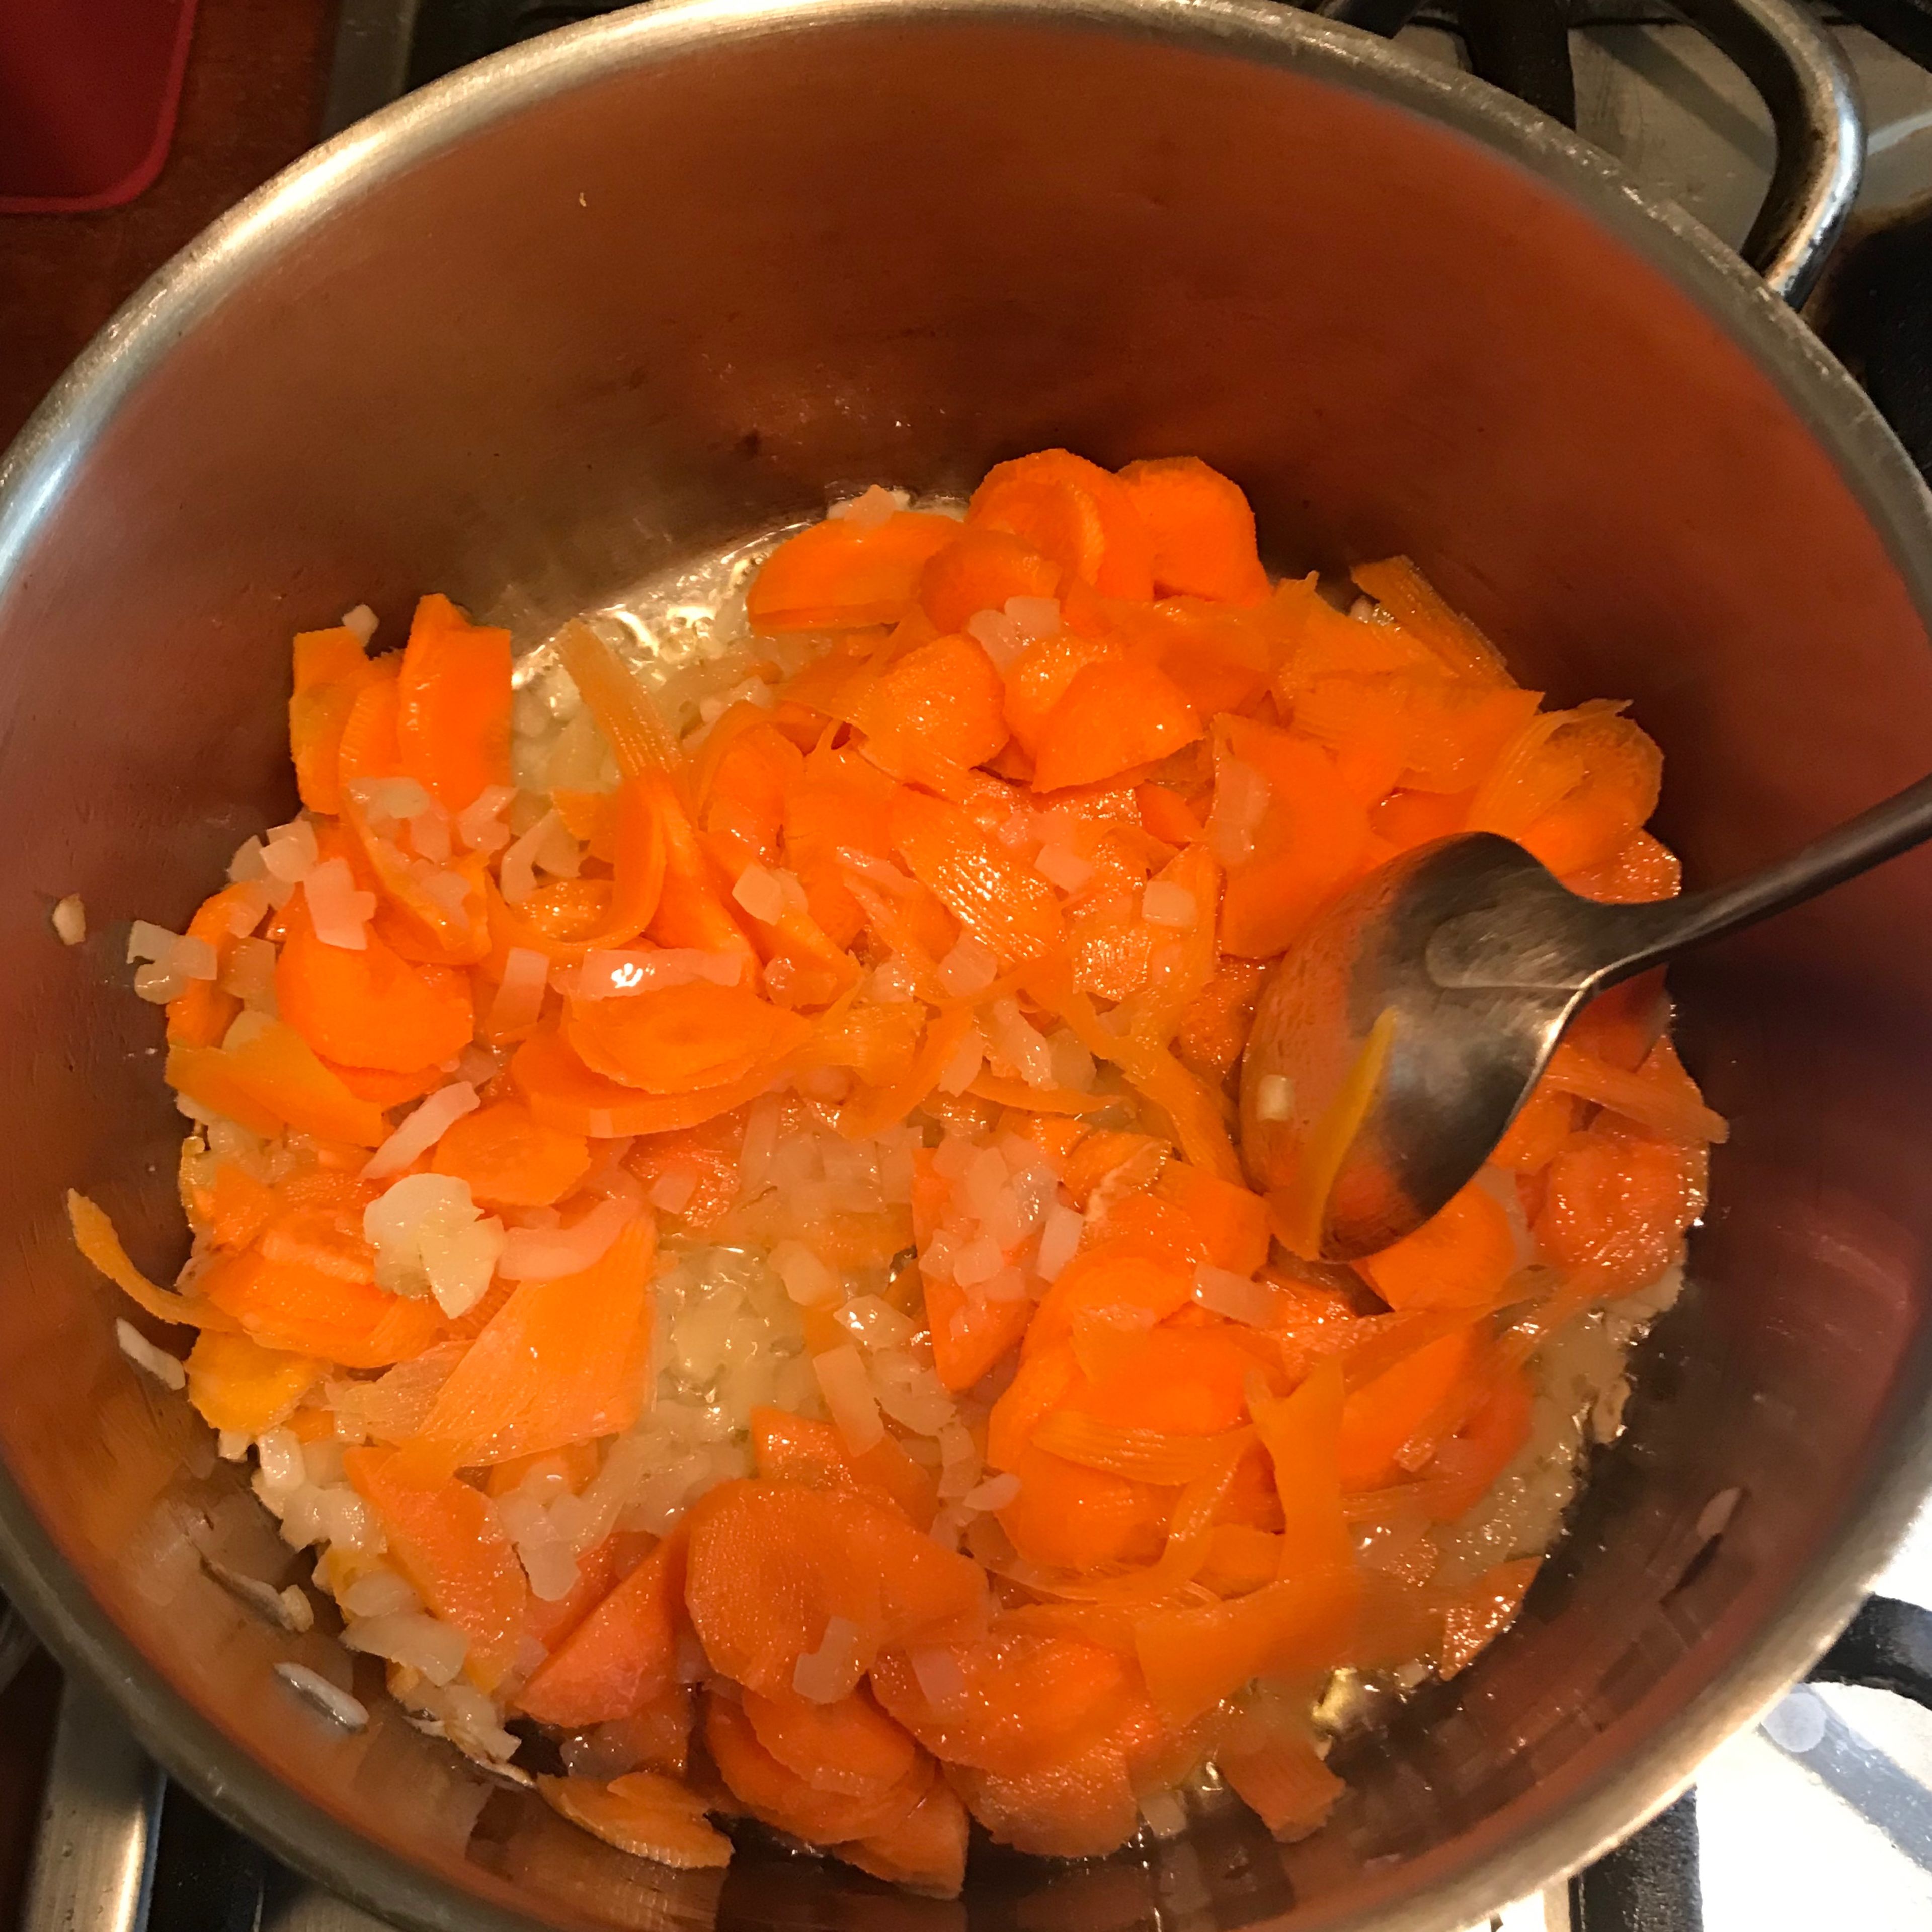 Heat the olive oil to the carrots and the onion until they are soft